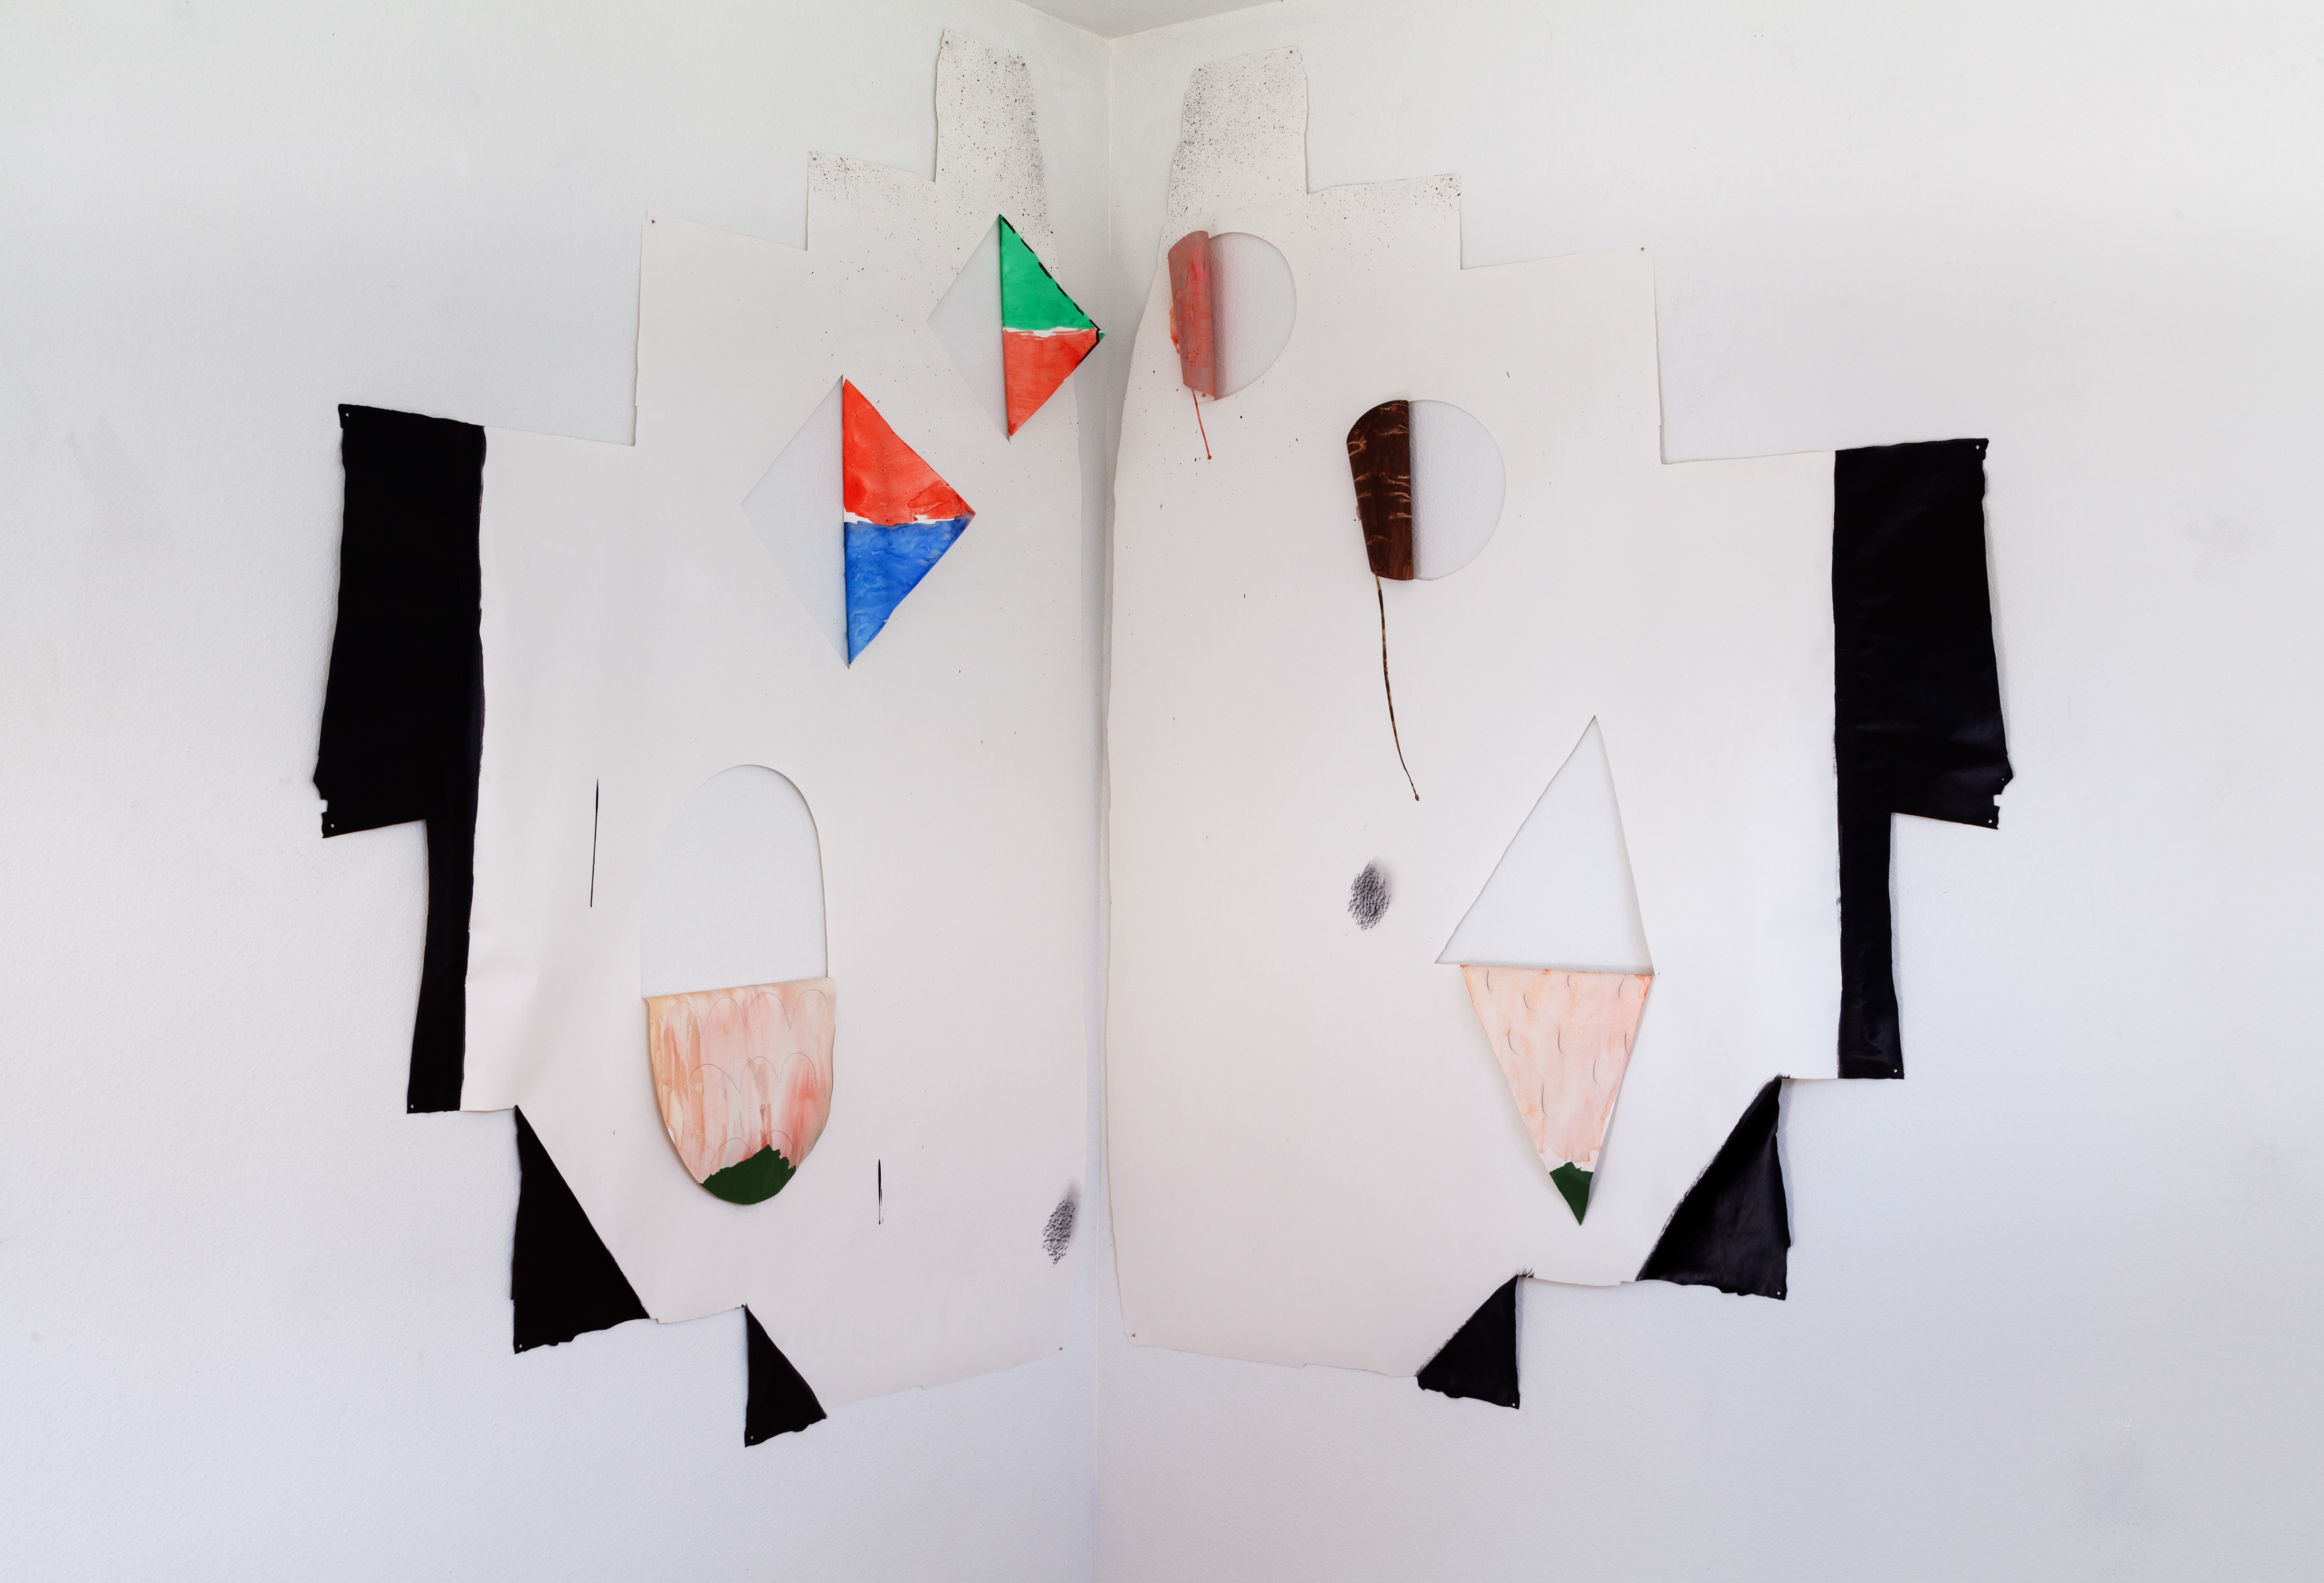 Untitled Paper Constructions